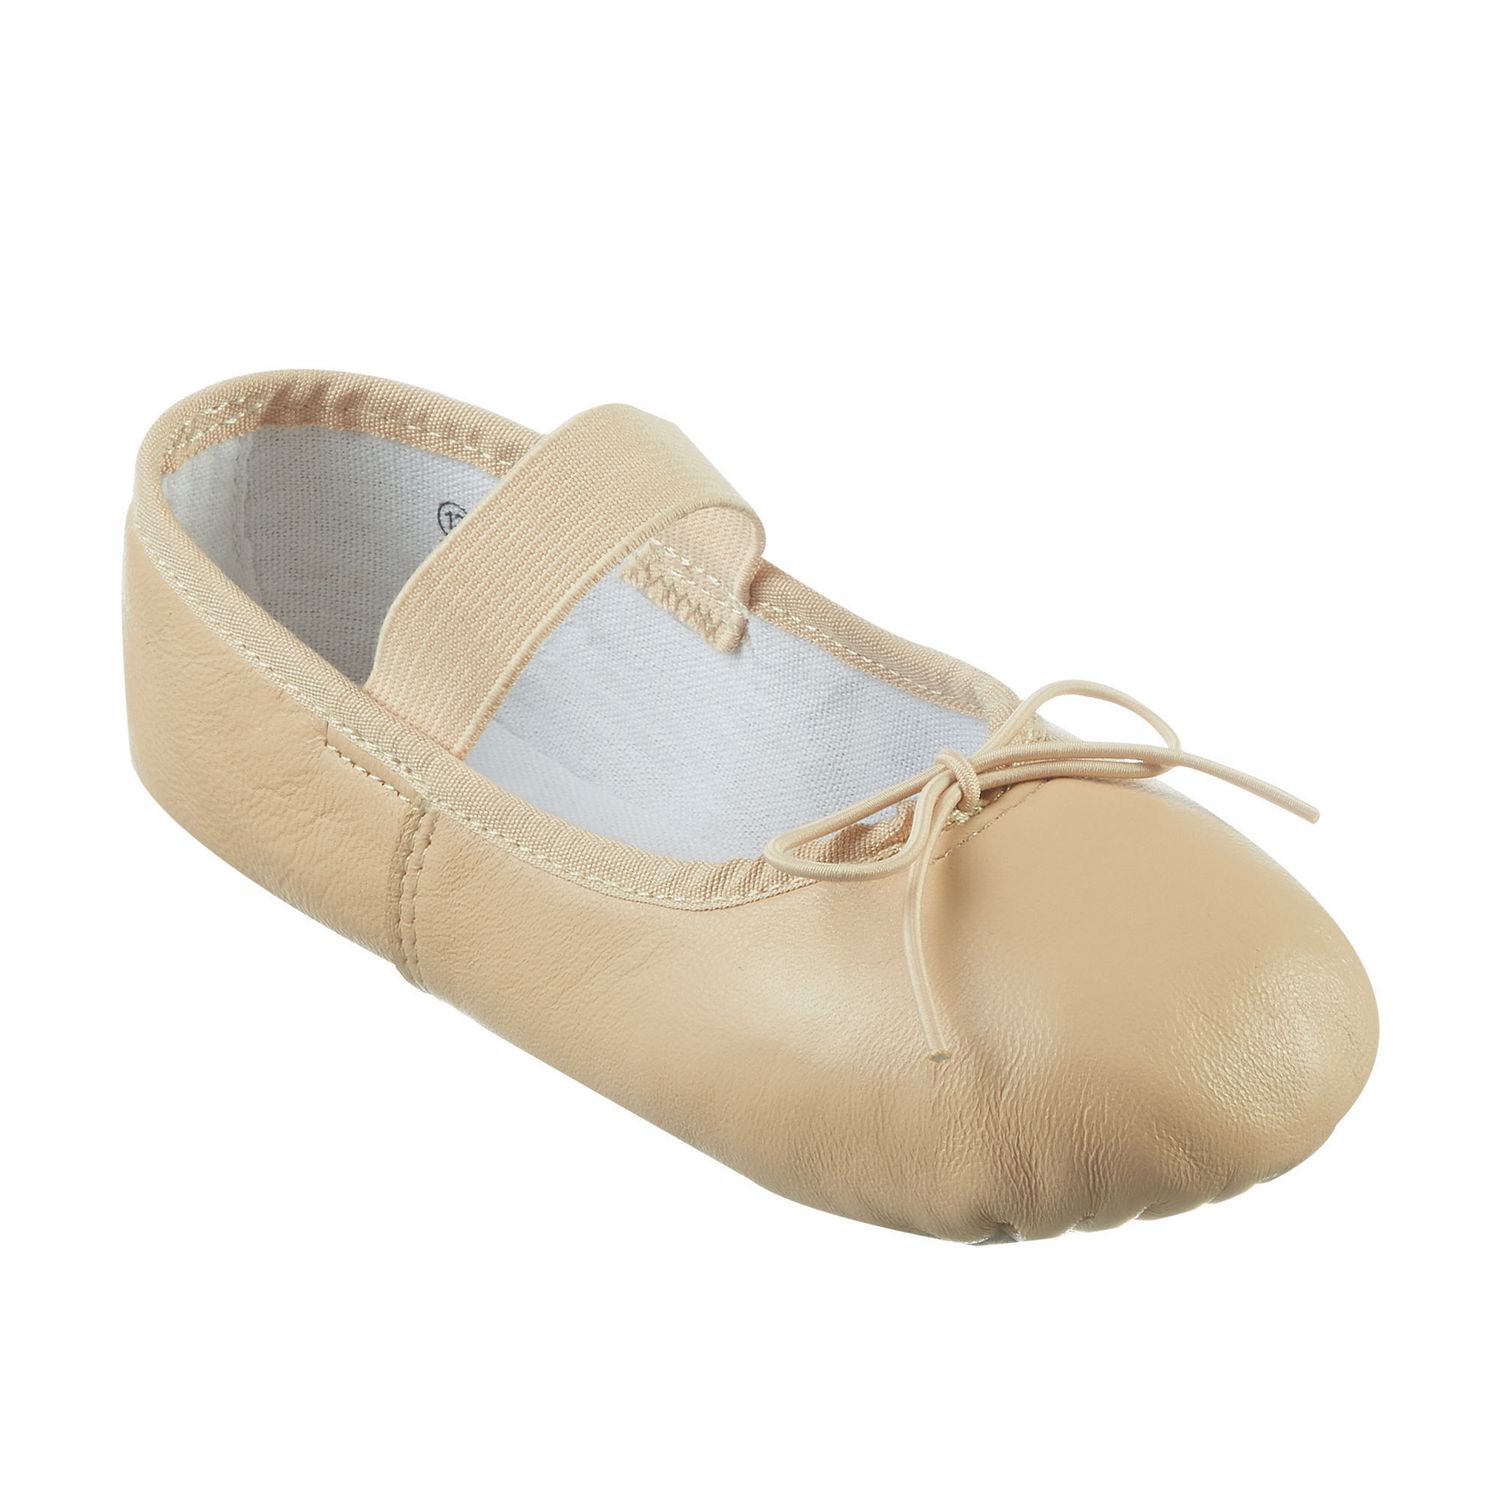 Athletic Works Girls’ Ballet Shoes | Walmart Canada